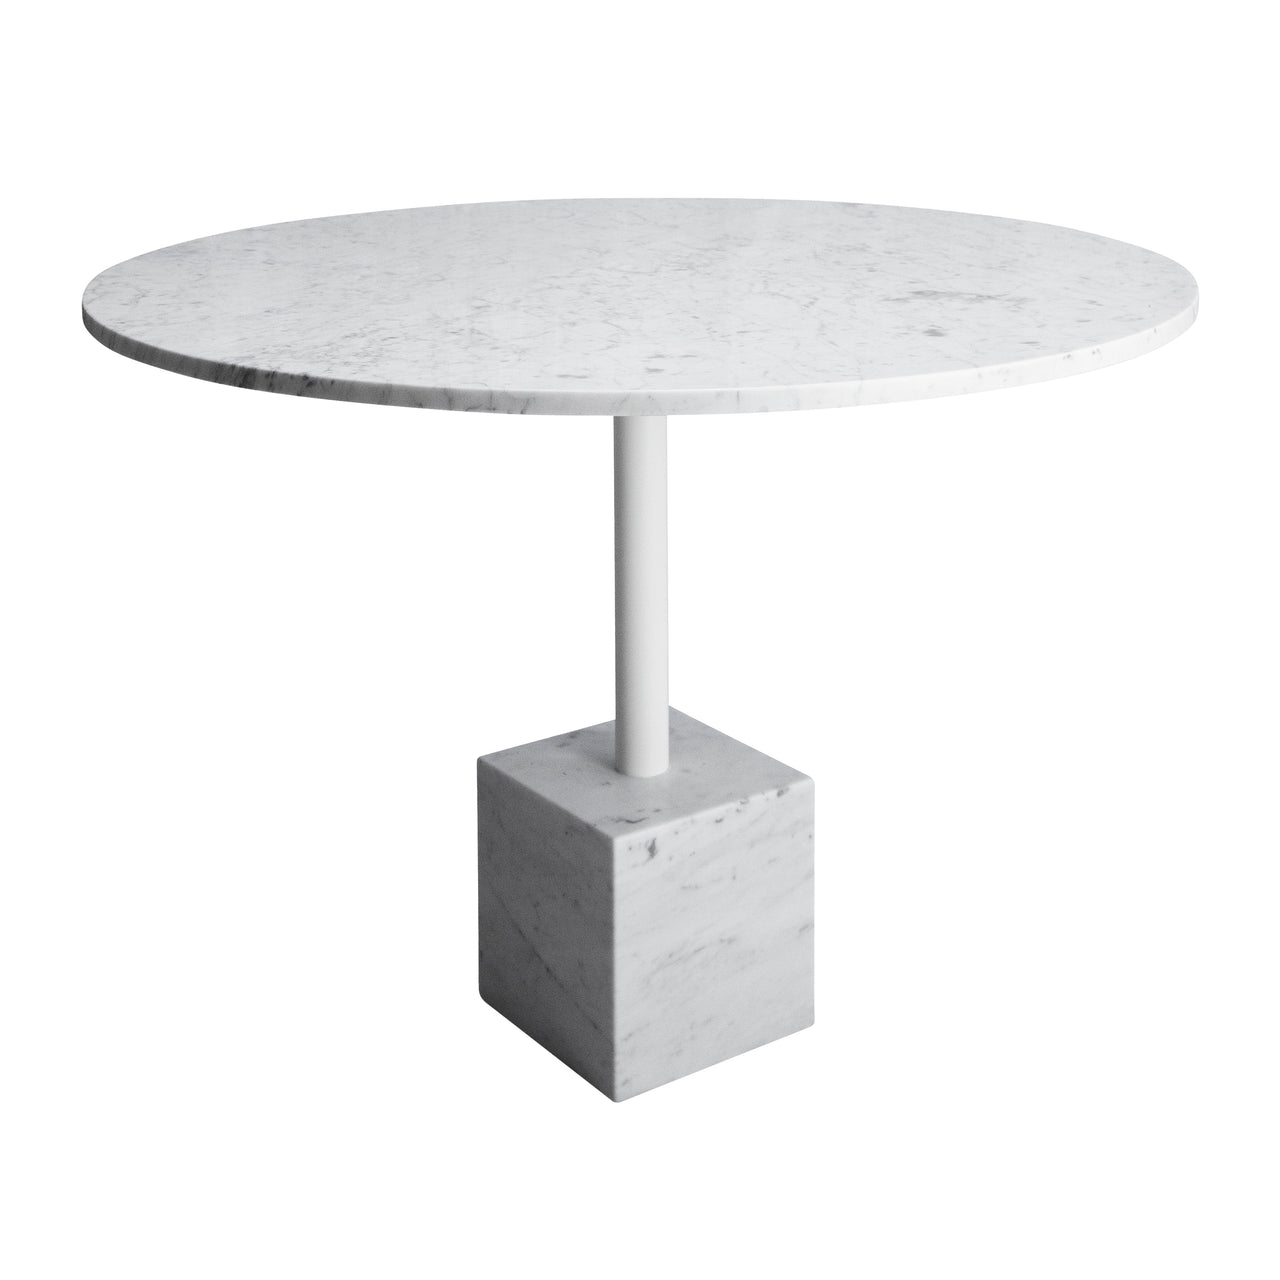 Knockout Dining Table: White Carrara Marble + White